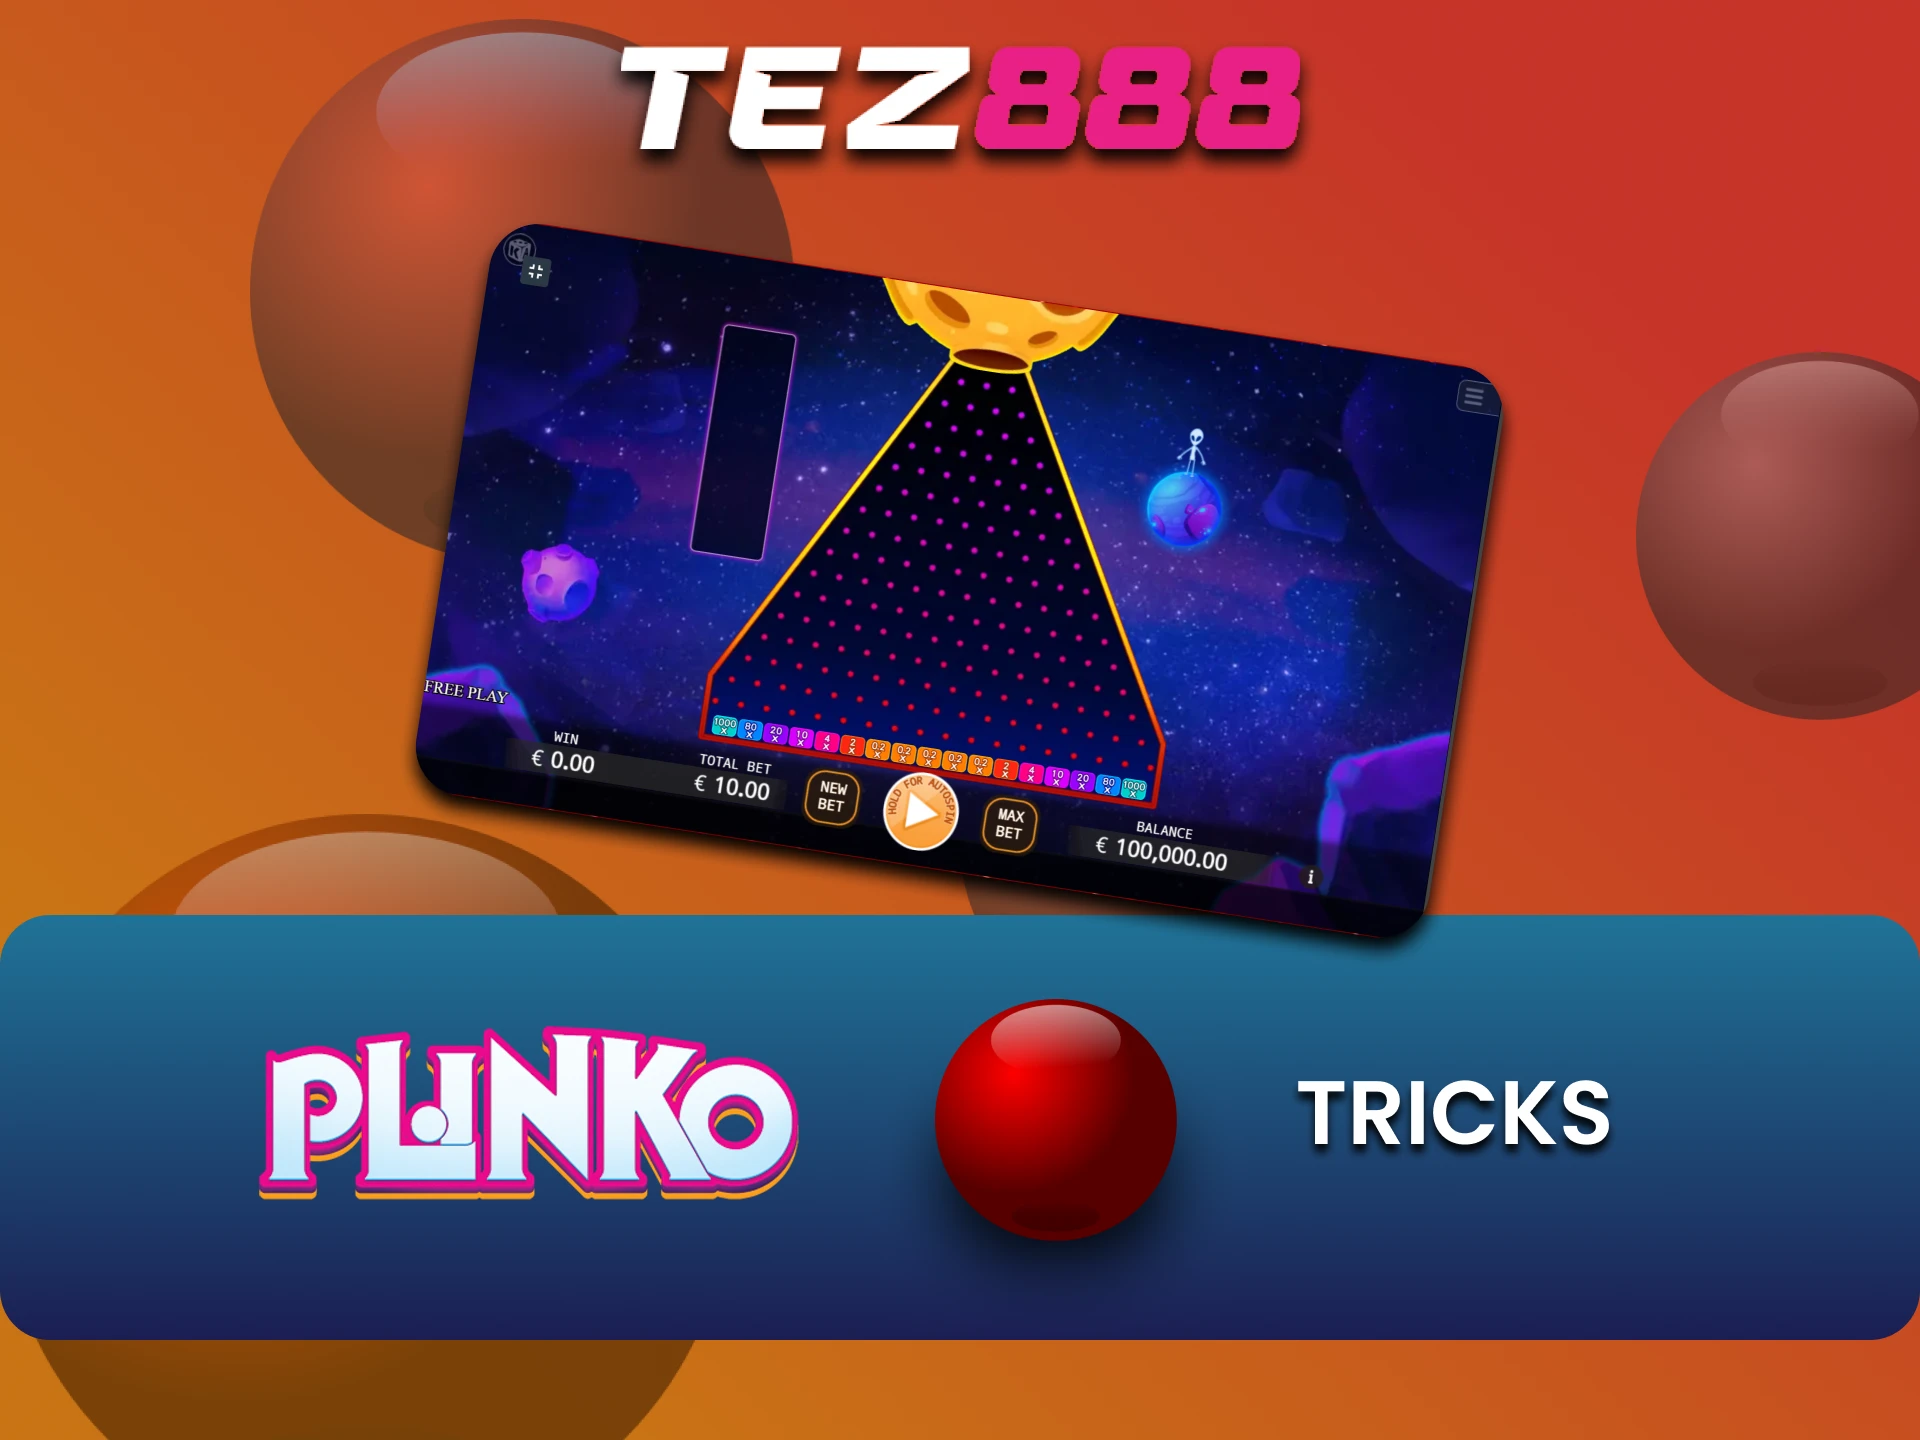 We will tell you about tricks for winning Plinko on Tez888.